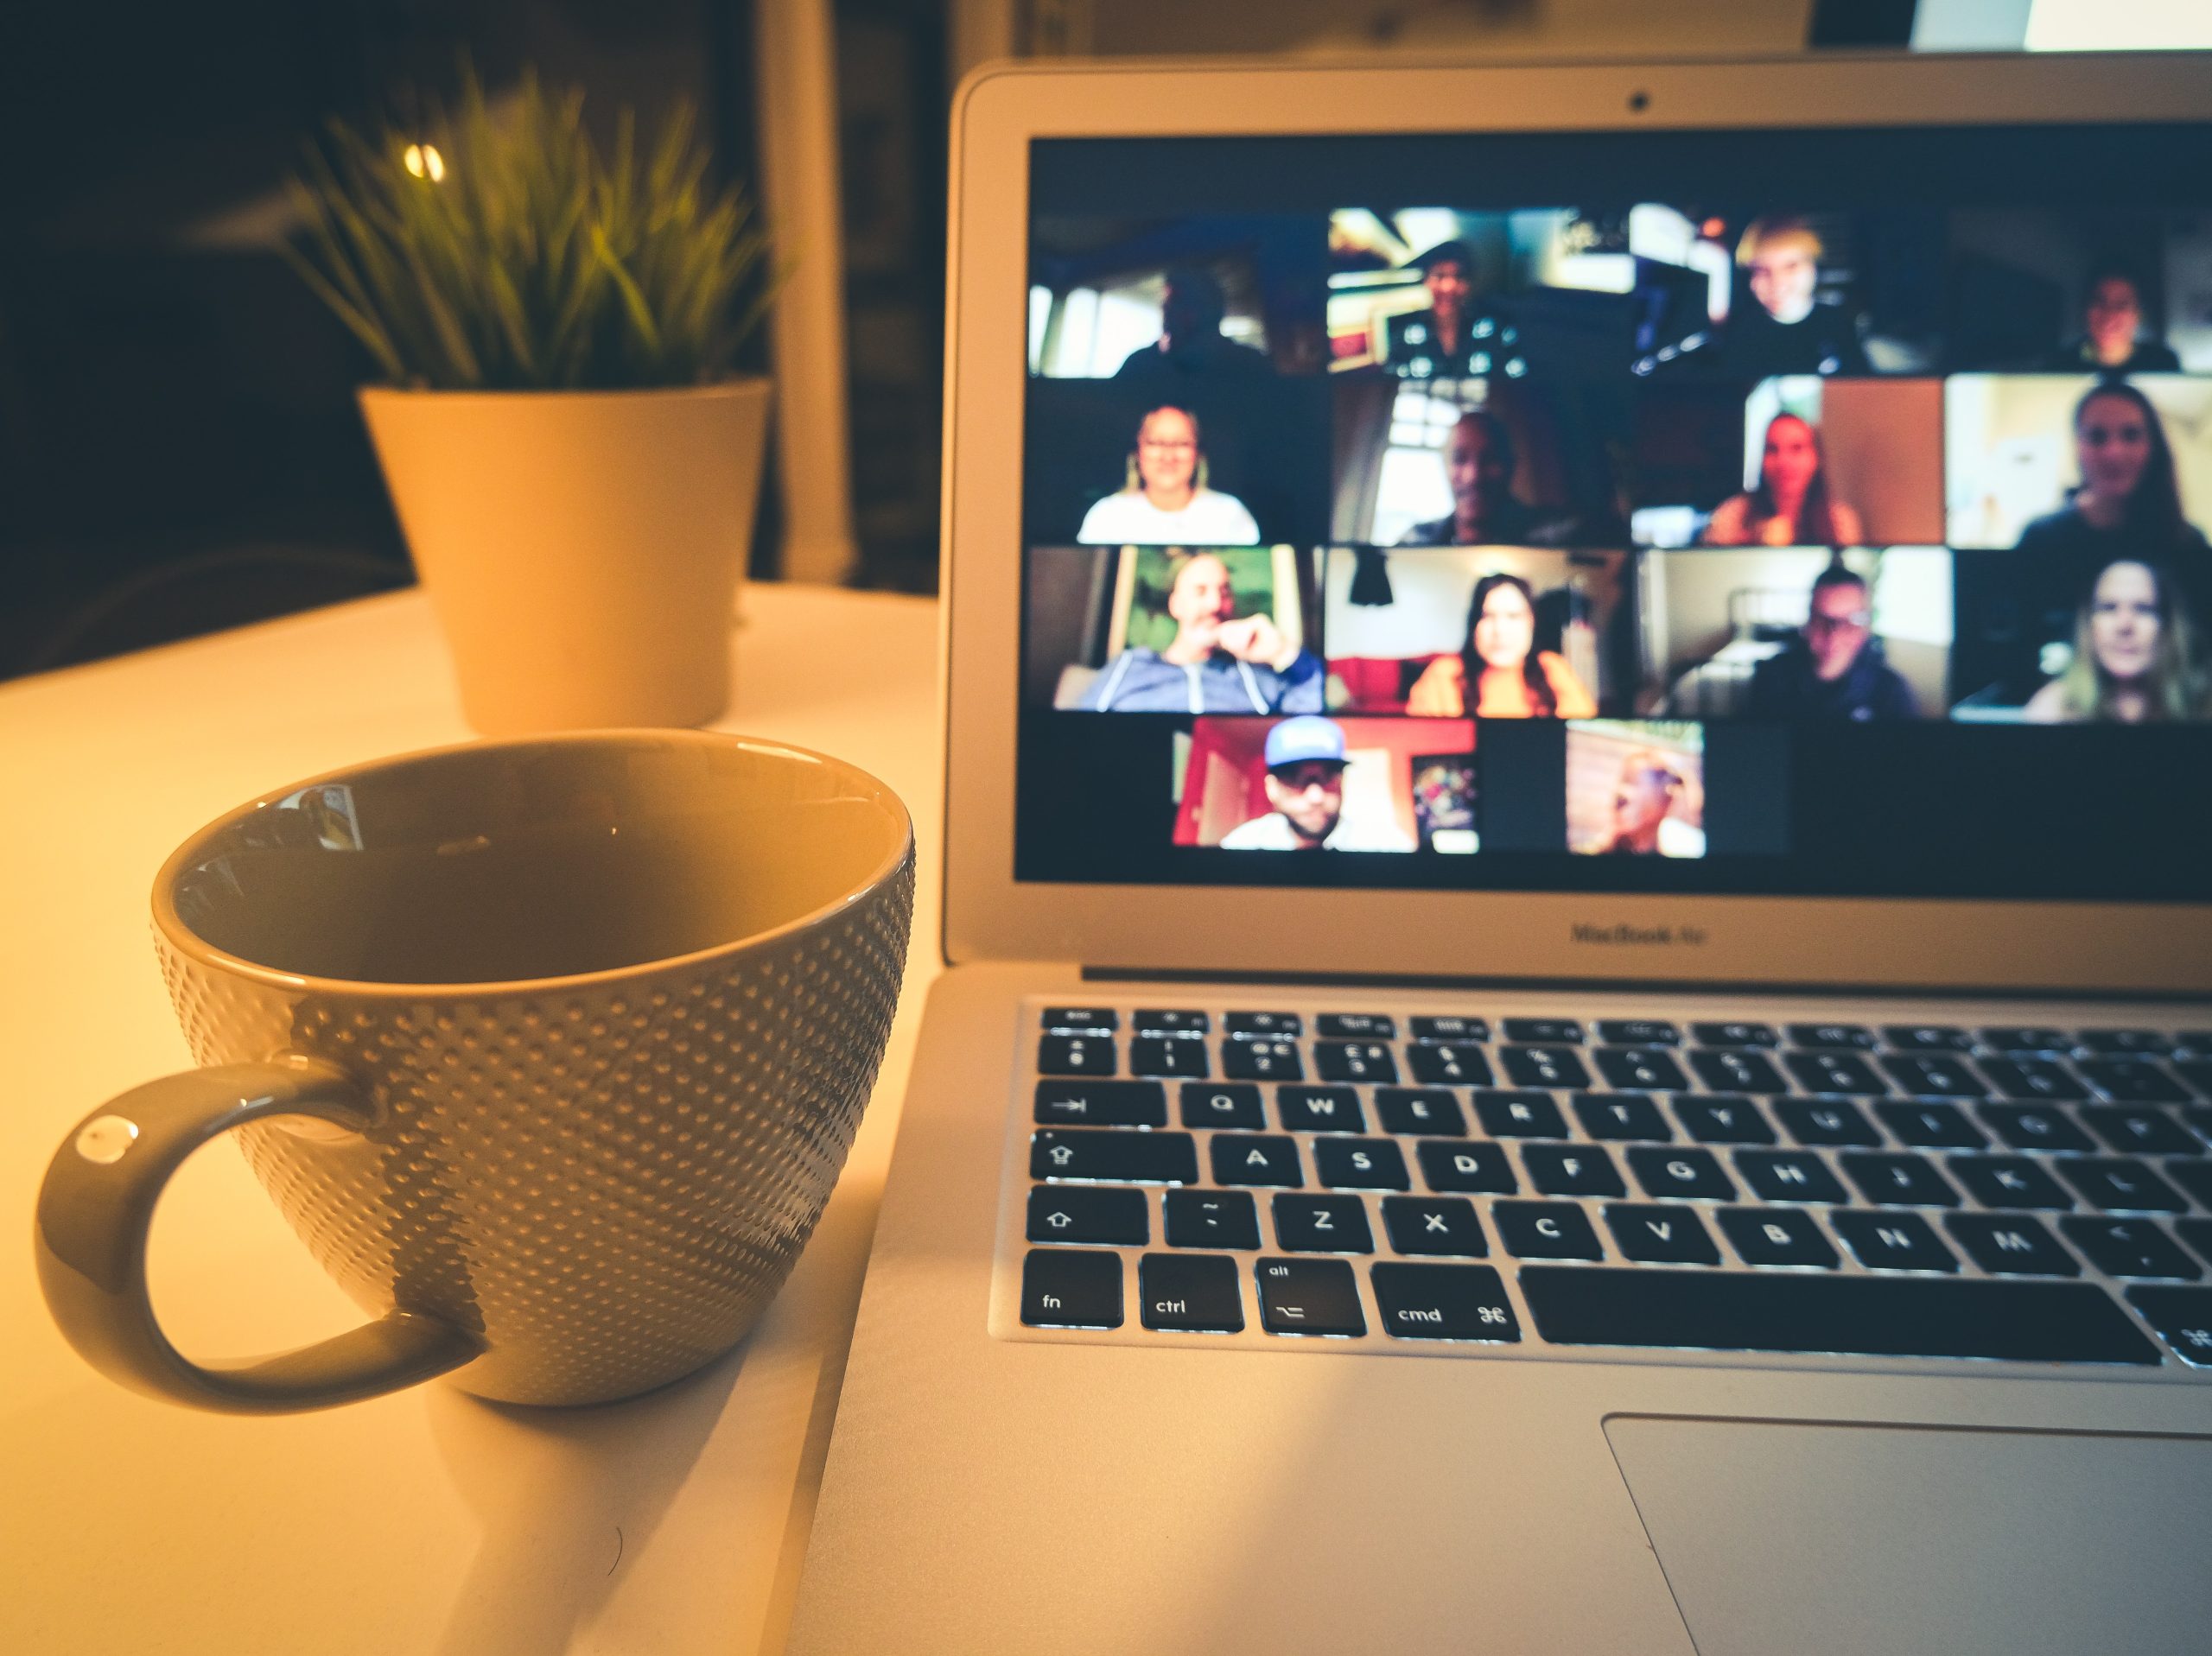 Photograph of a laptop screen showing multiple people on a video call, next to the laptop is a mug